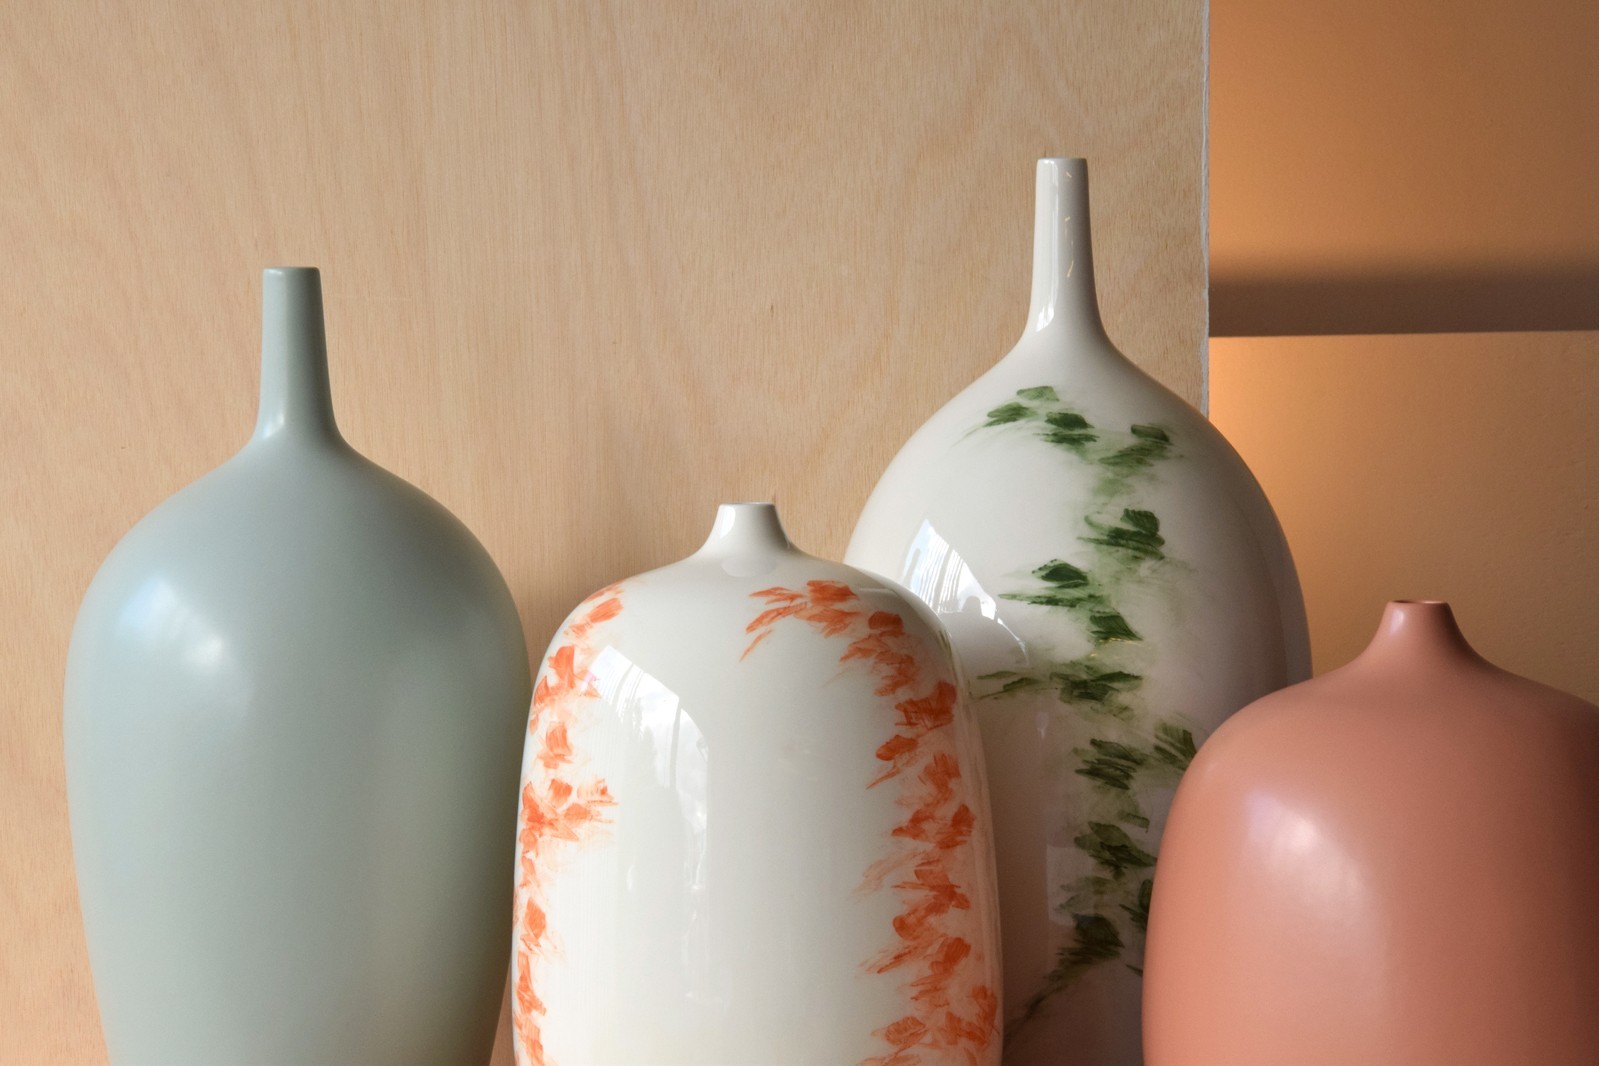 GREEN COLLECTION: HAND-PAINTED CERAMIC VASES